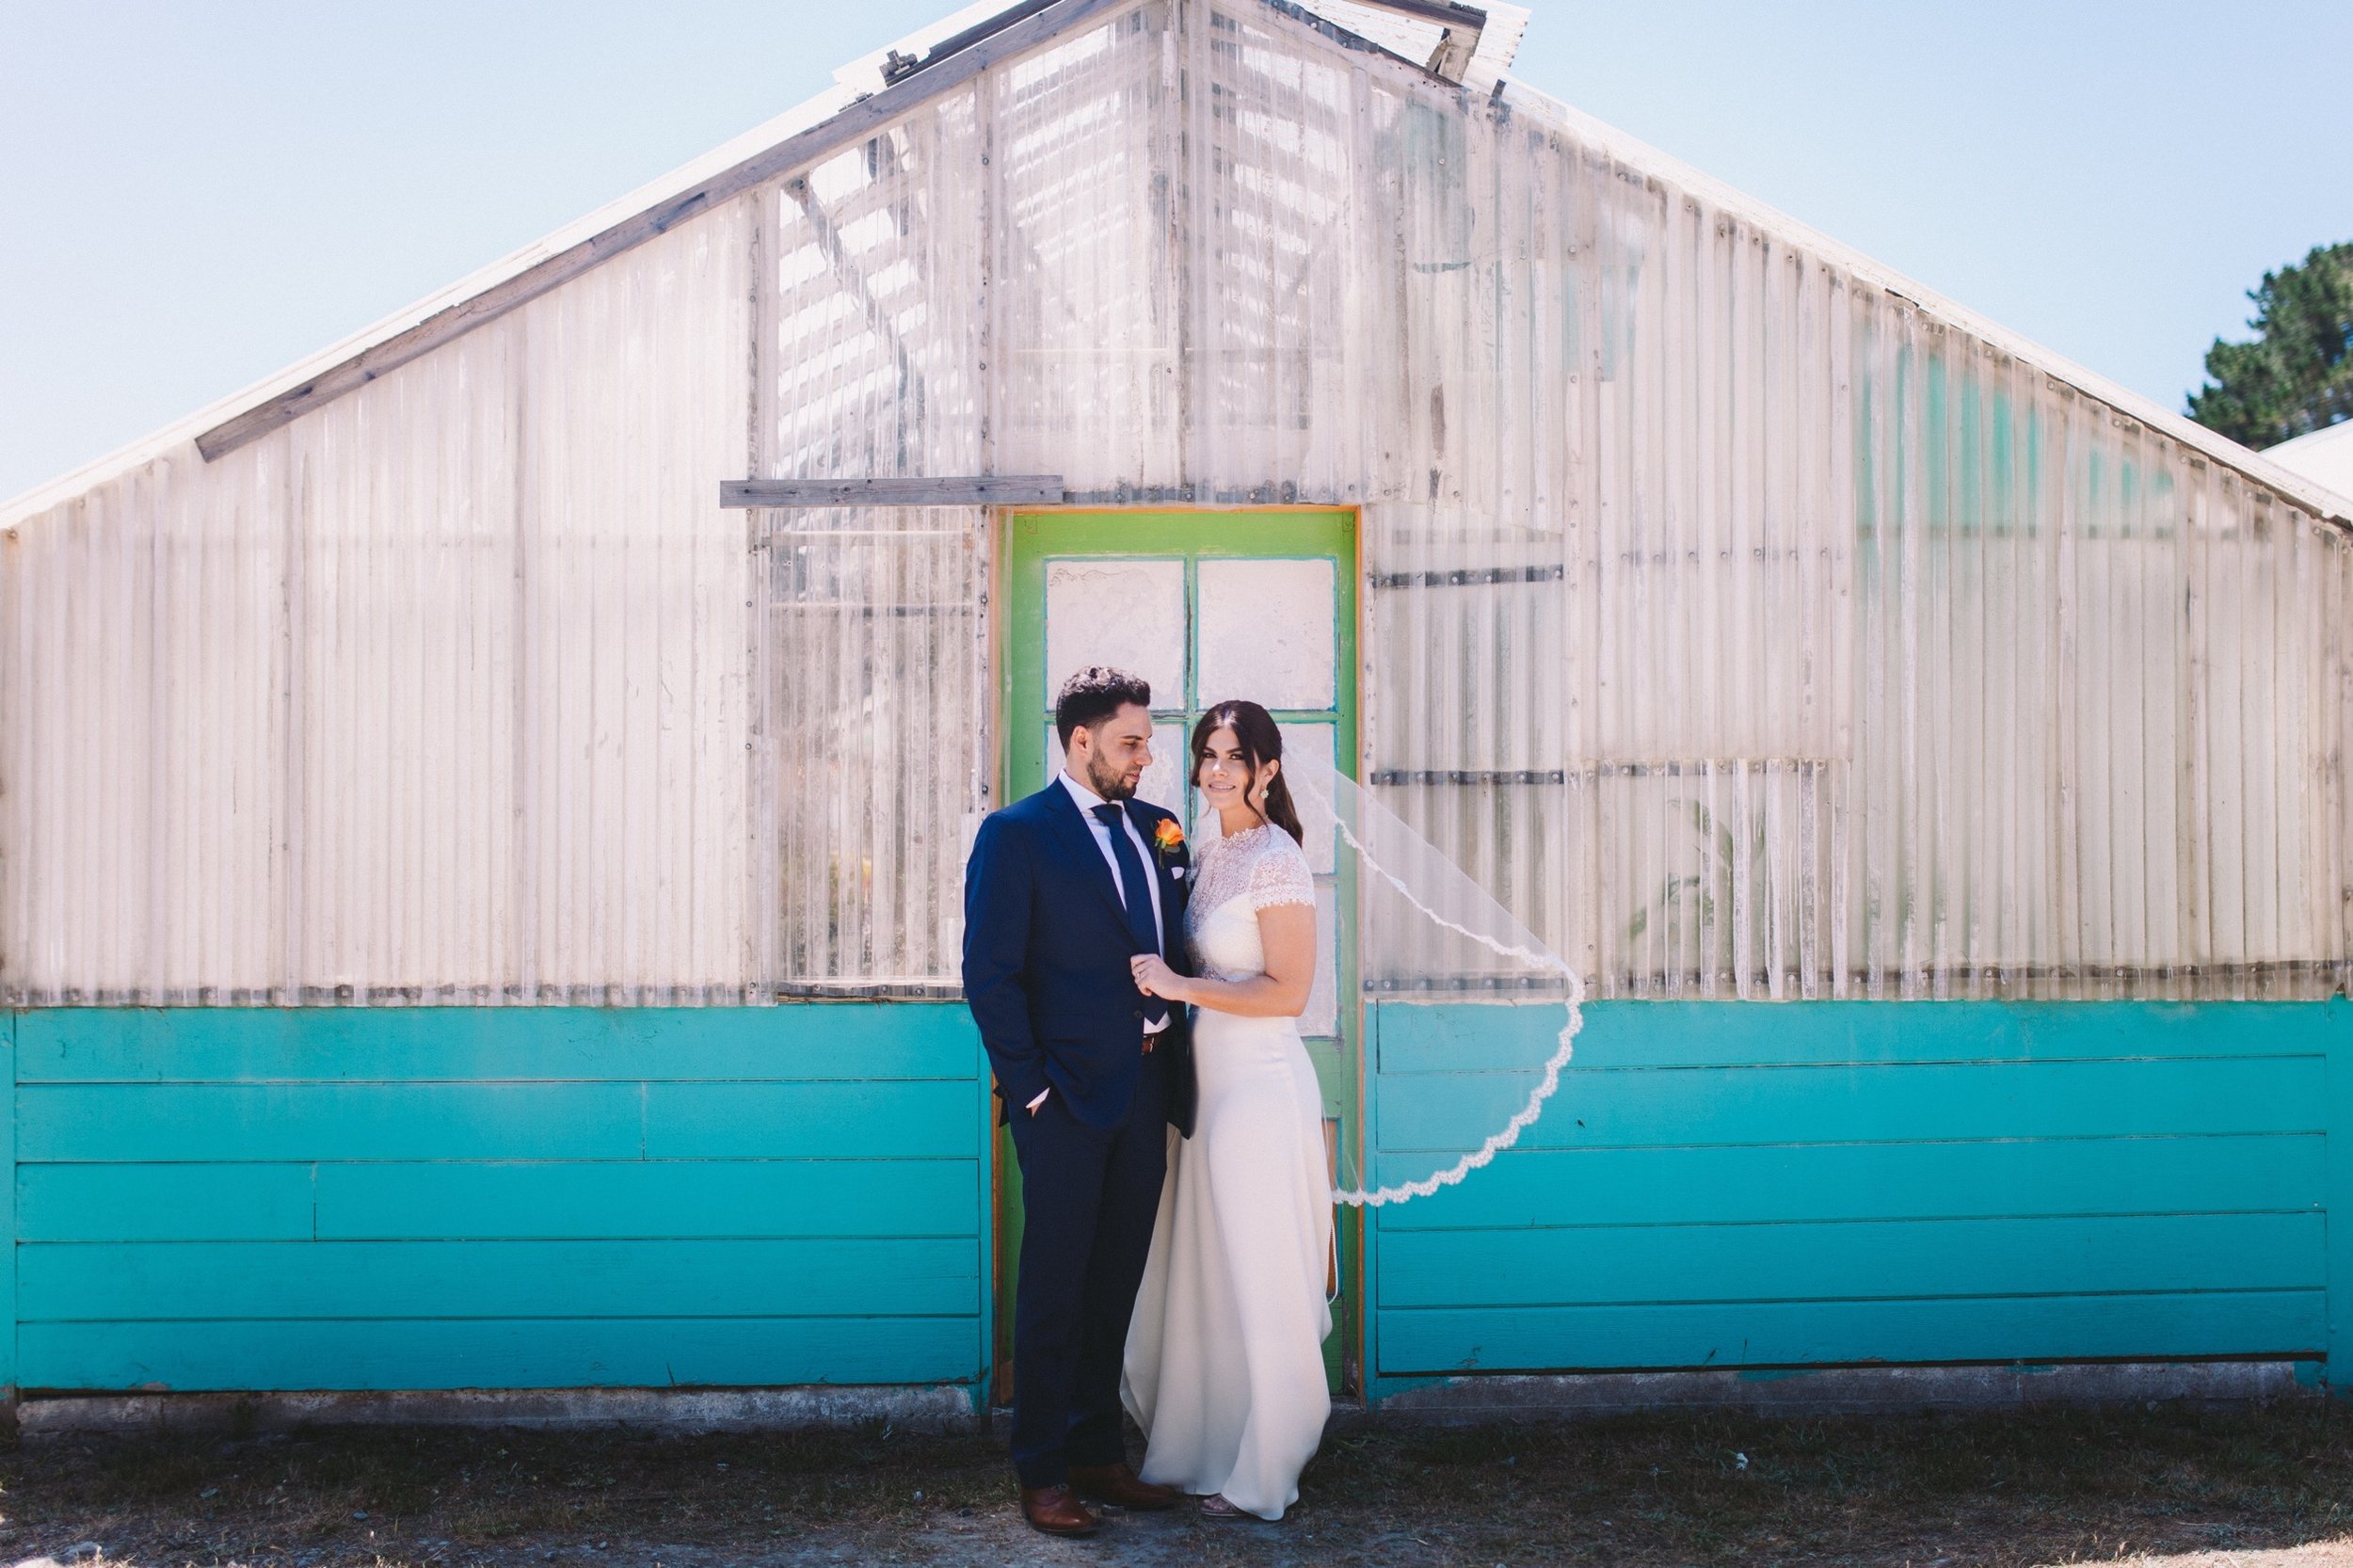 Bride & Groom Portrait in front of Brightly Painted Greenhouse at Shelldance Orchid Gardens